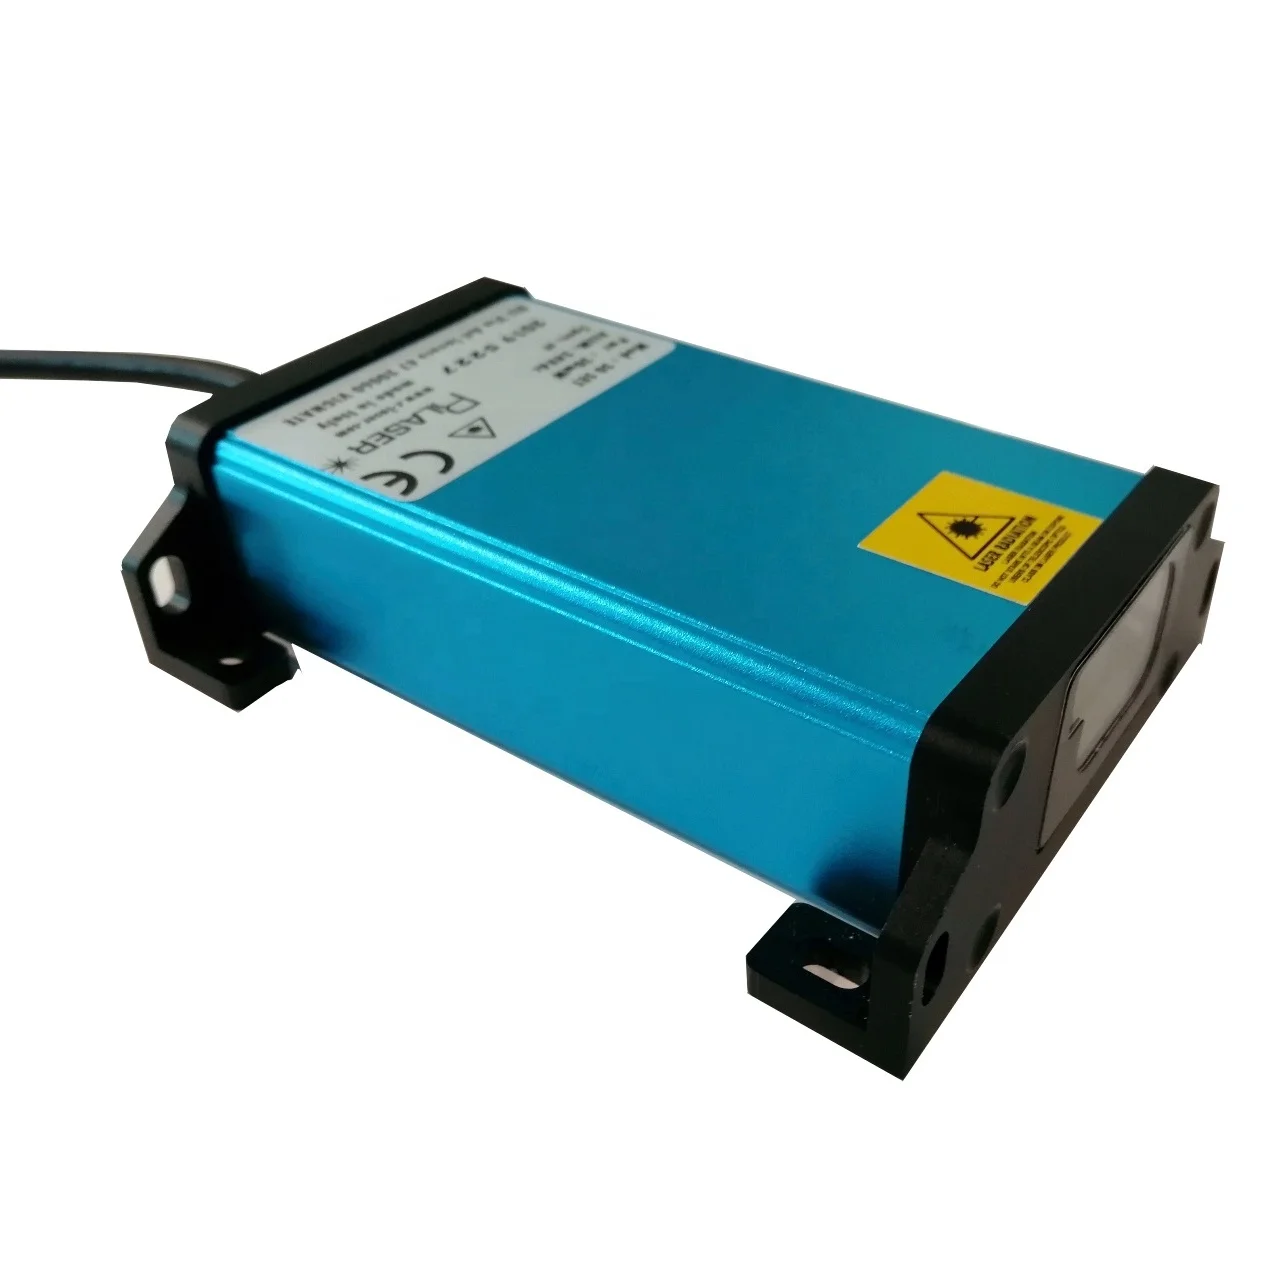 

Solid level control 50m high resolution 1mm industry laser distance sensor RS485 MODBUS or 4-20mA